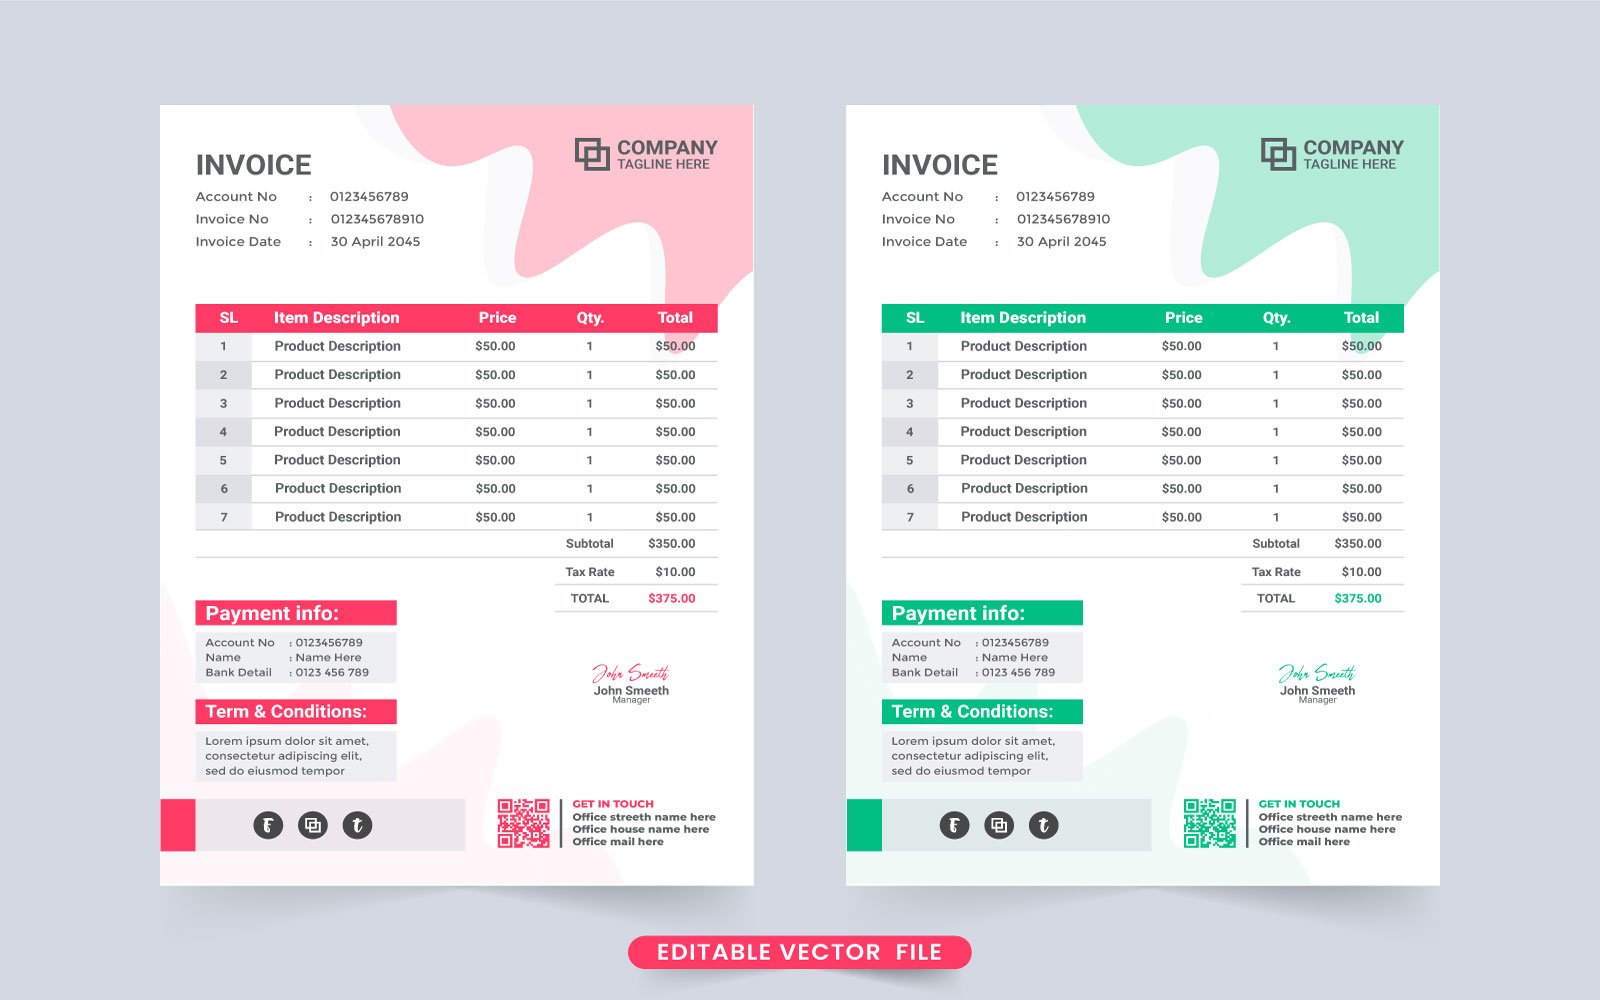 Template #272350 Invoice Template Webdesign Template - Logo template Preview